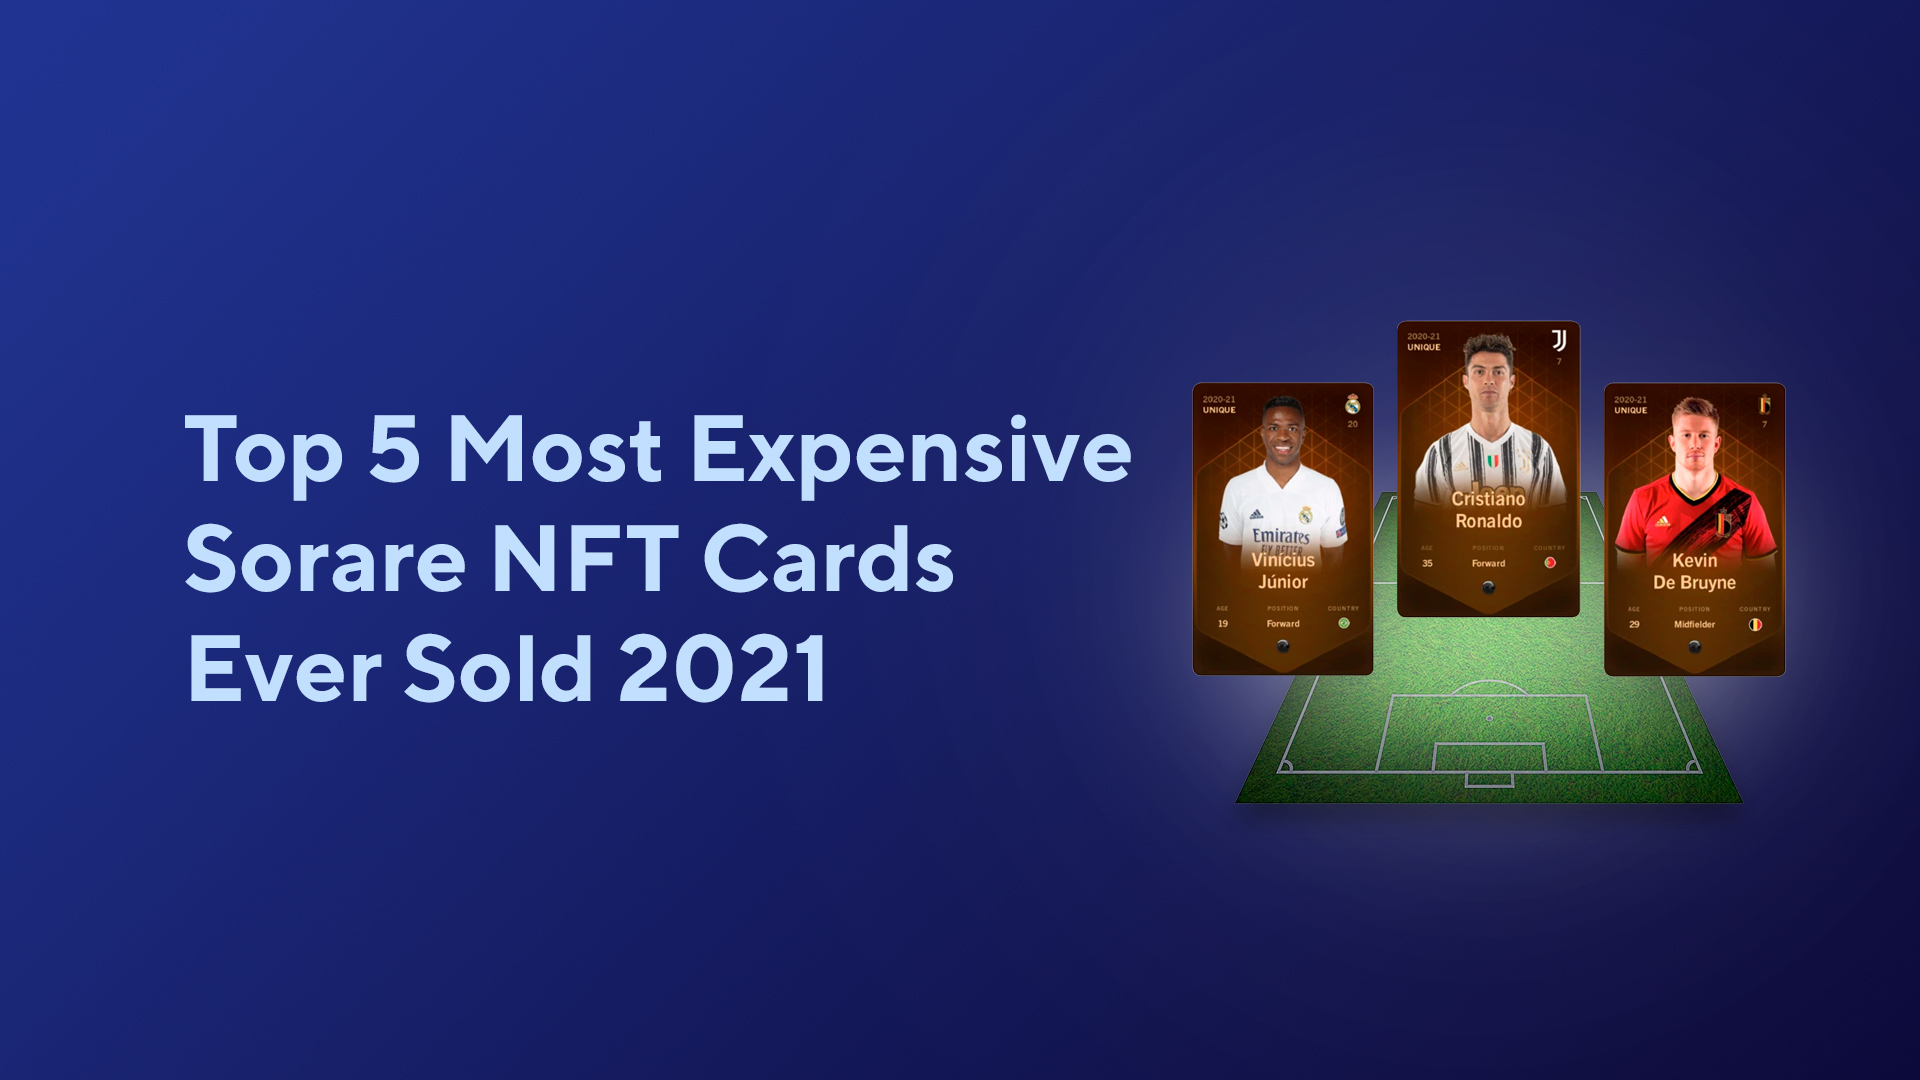 Top 5 Most Expensive Sorare NFT Cards Ever Sold 2021